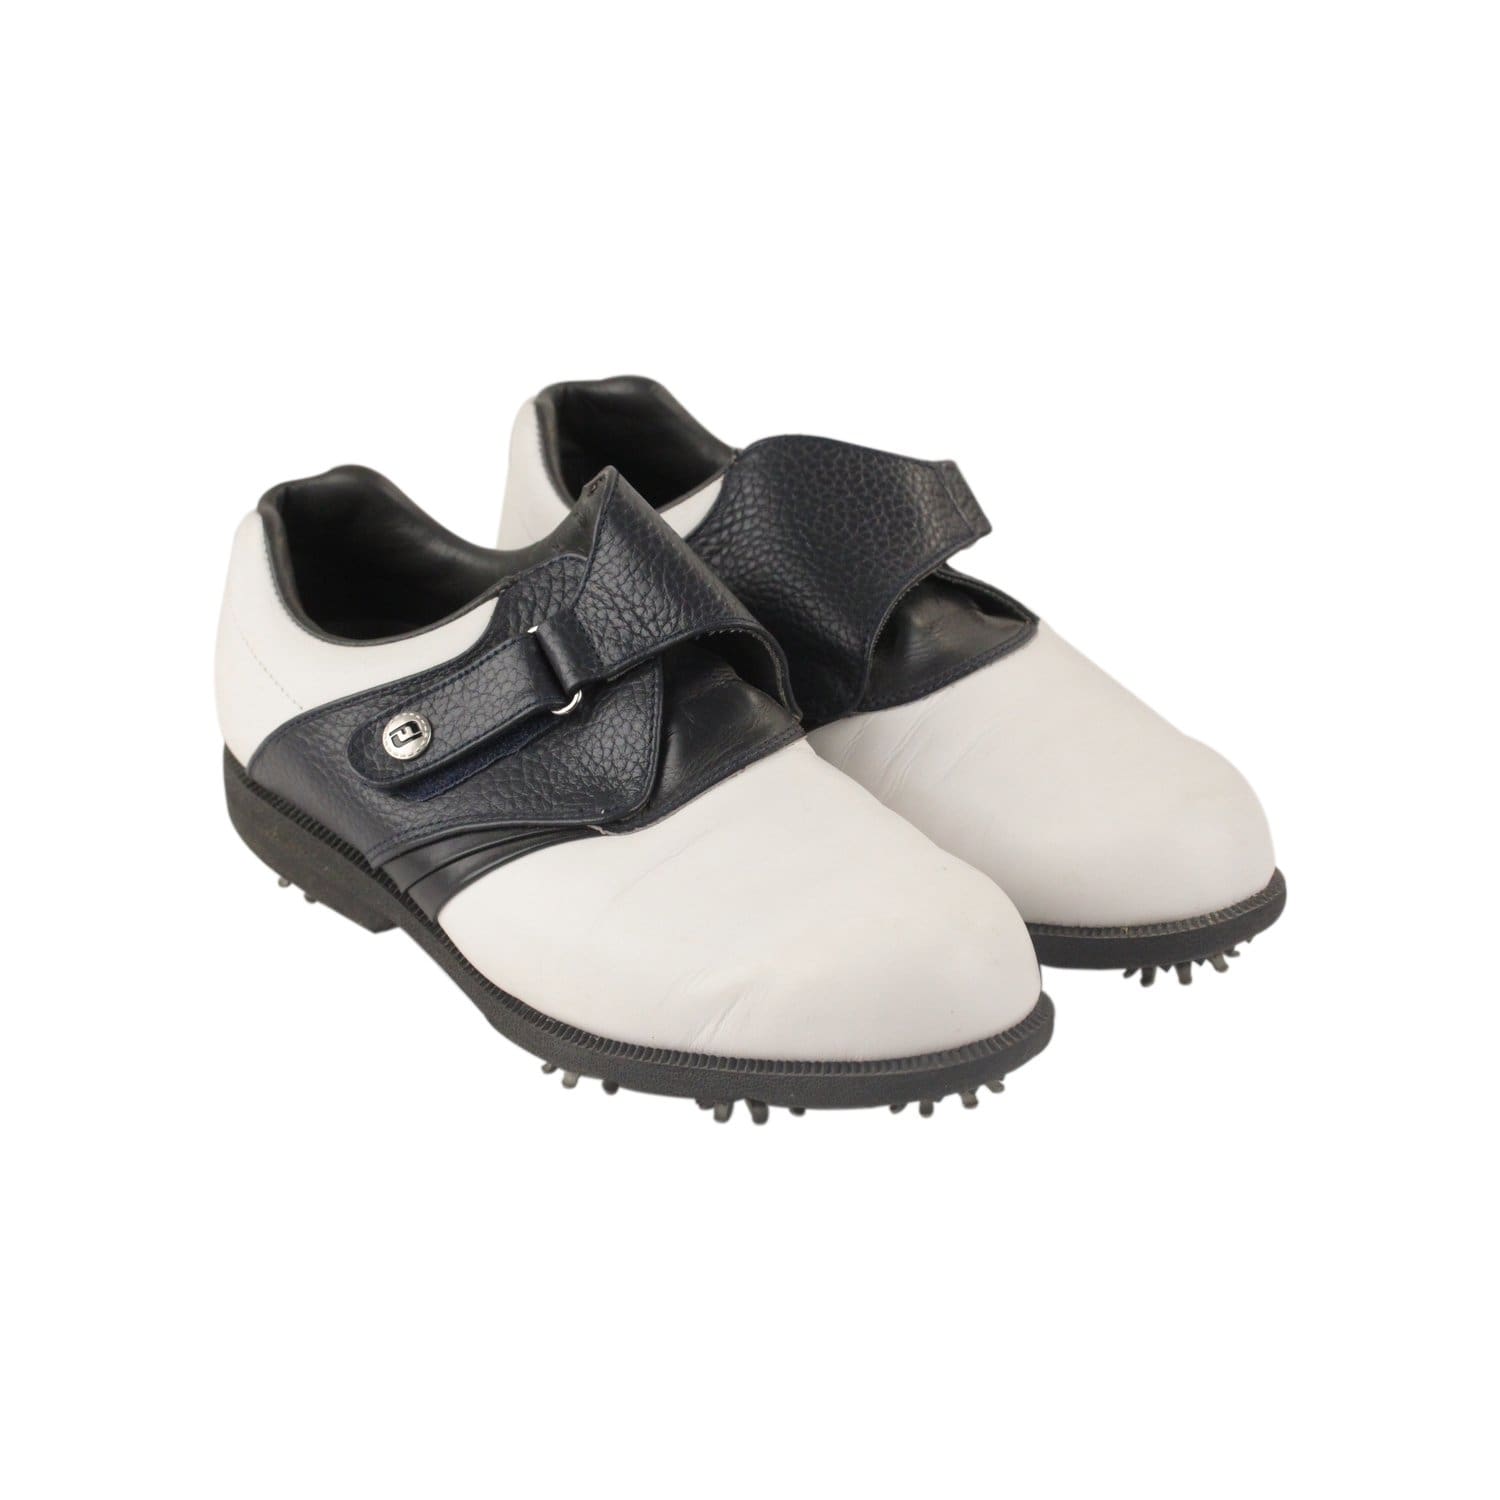 golf shoes with velcro closures